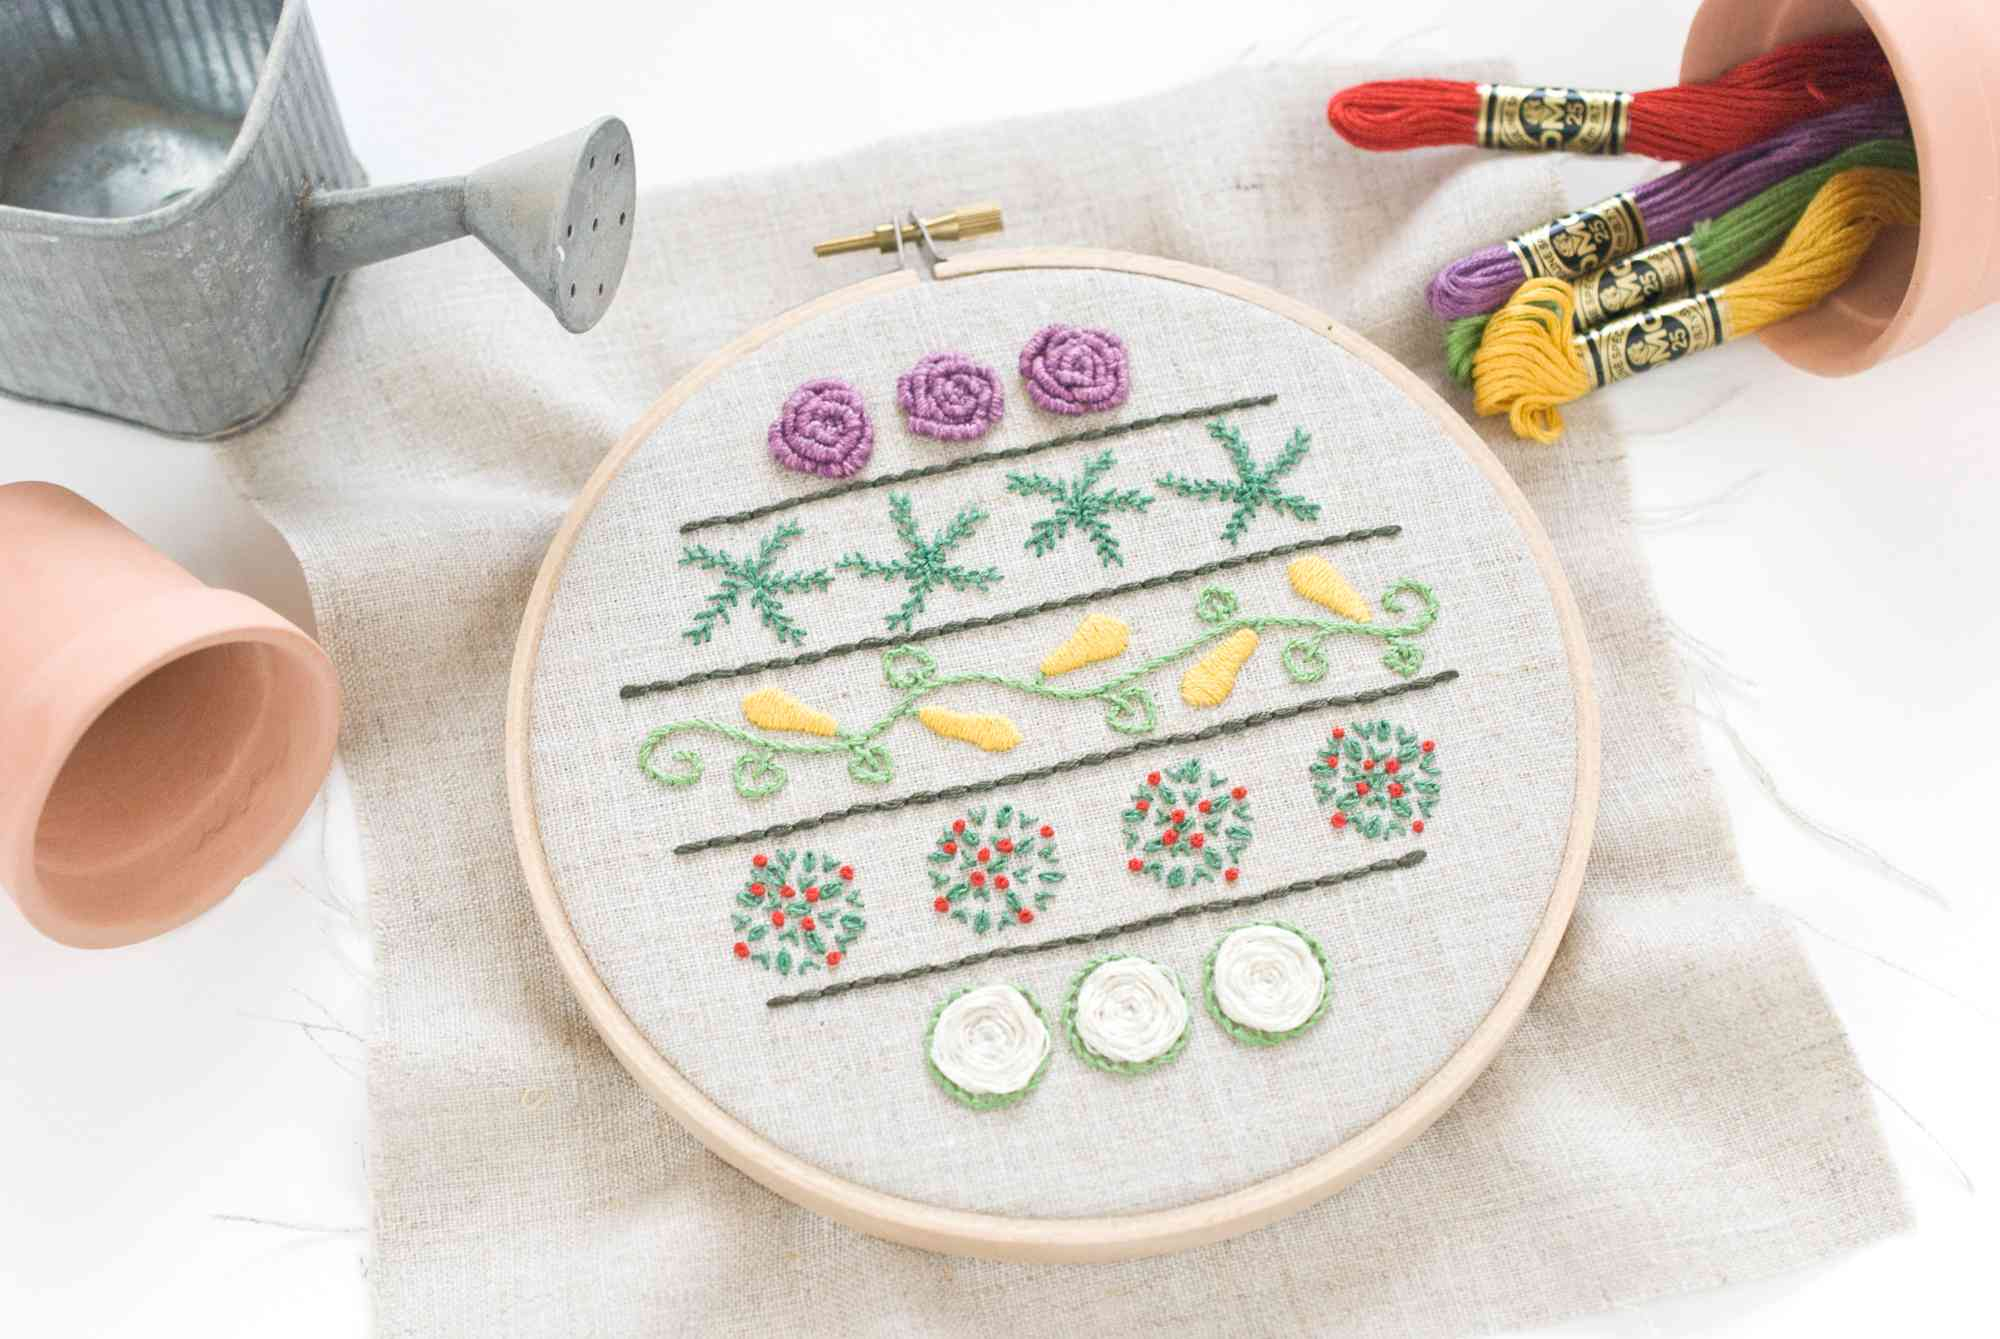 How To Design Embroidery Patterns Our Top 25 Free Embroidery Designs